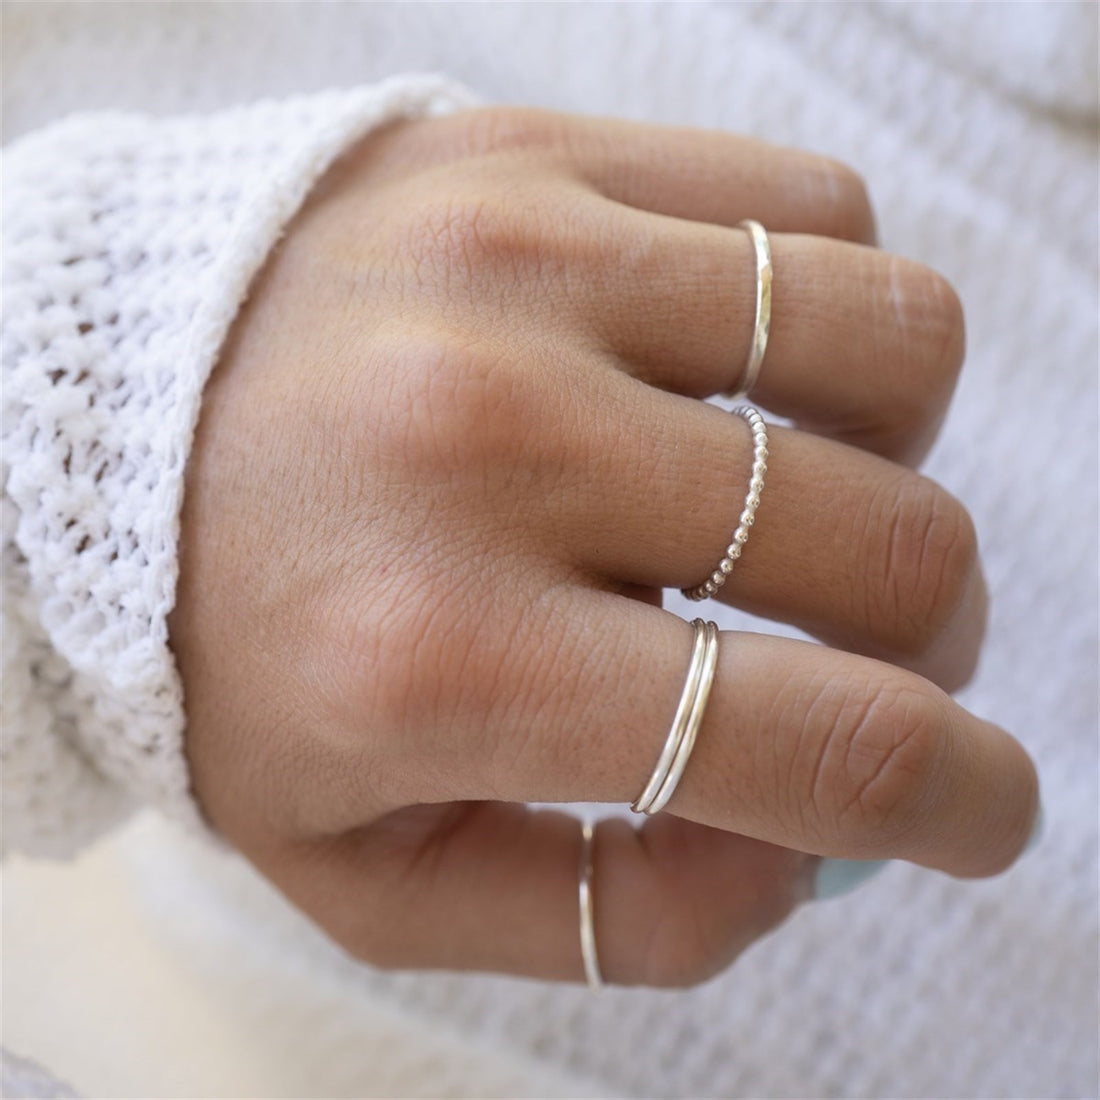 Stacker Ring in Sterling Silver